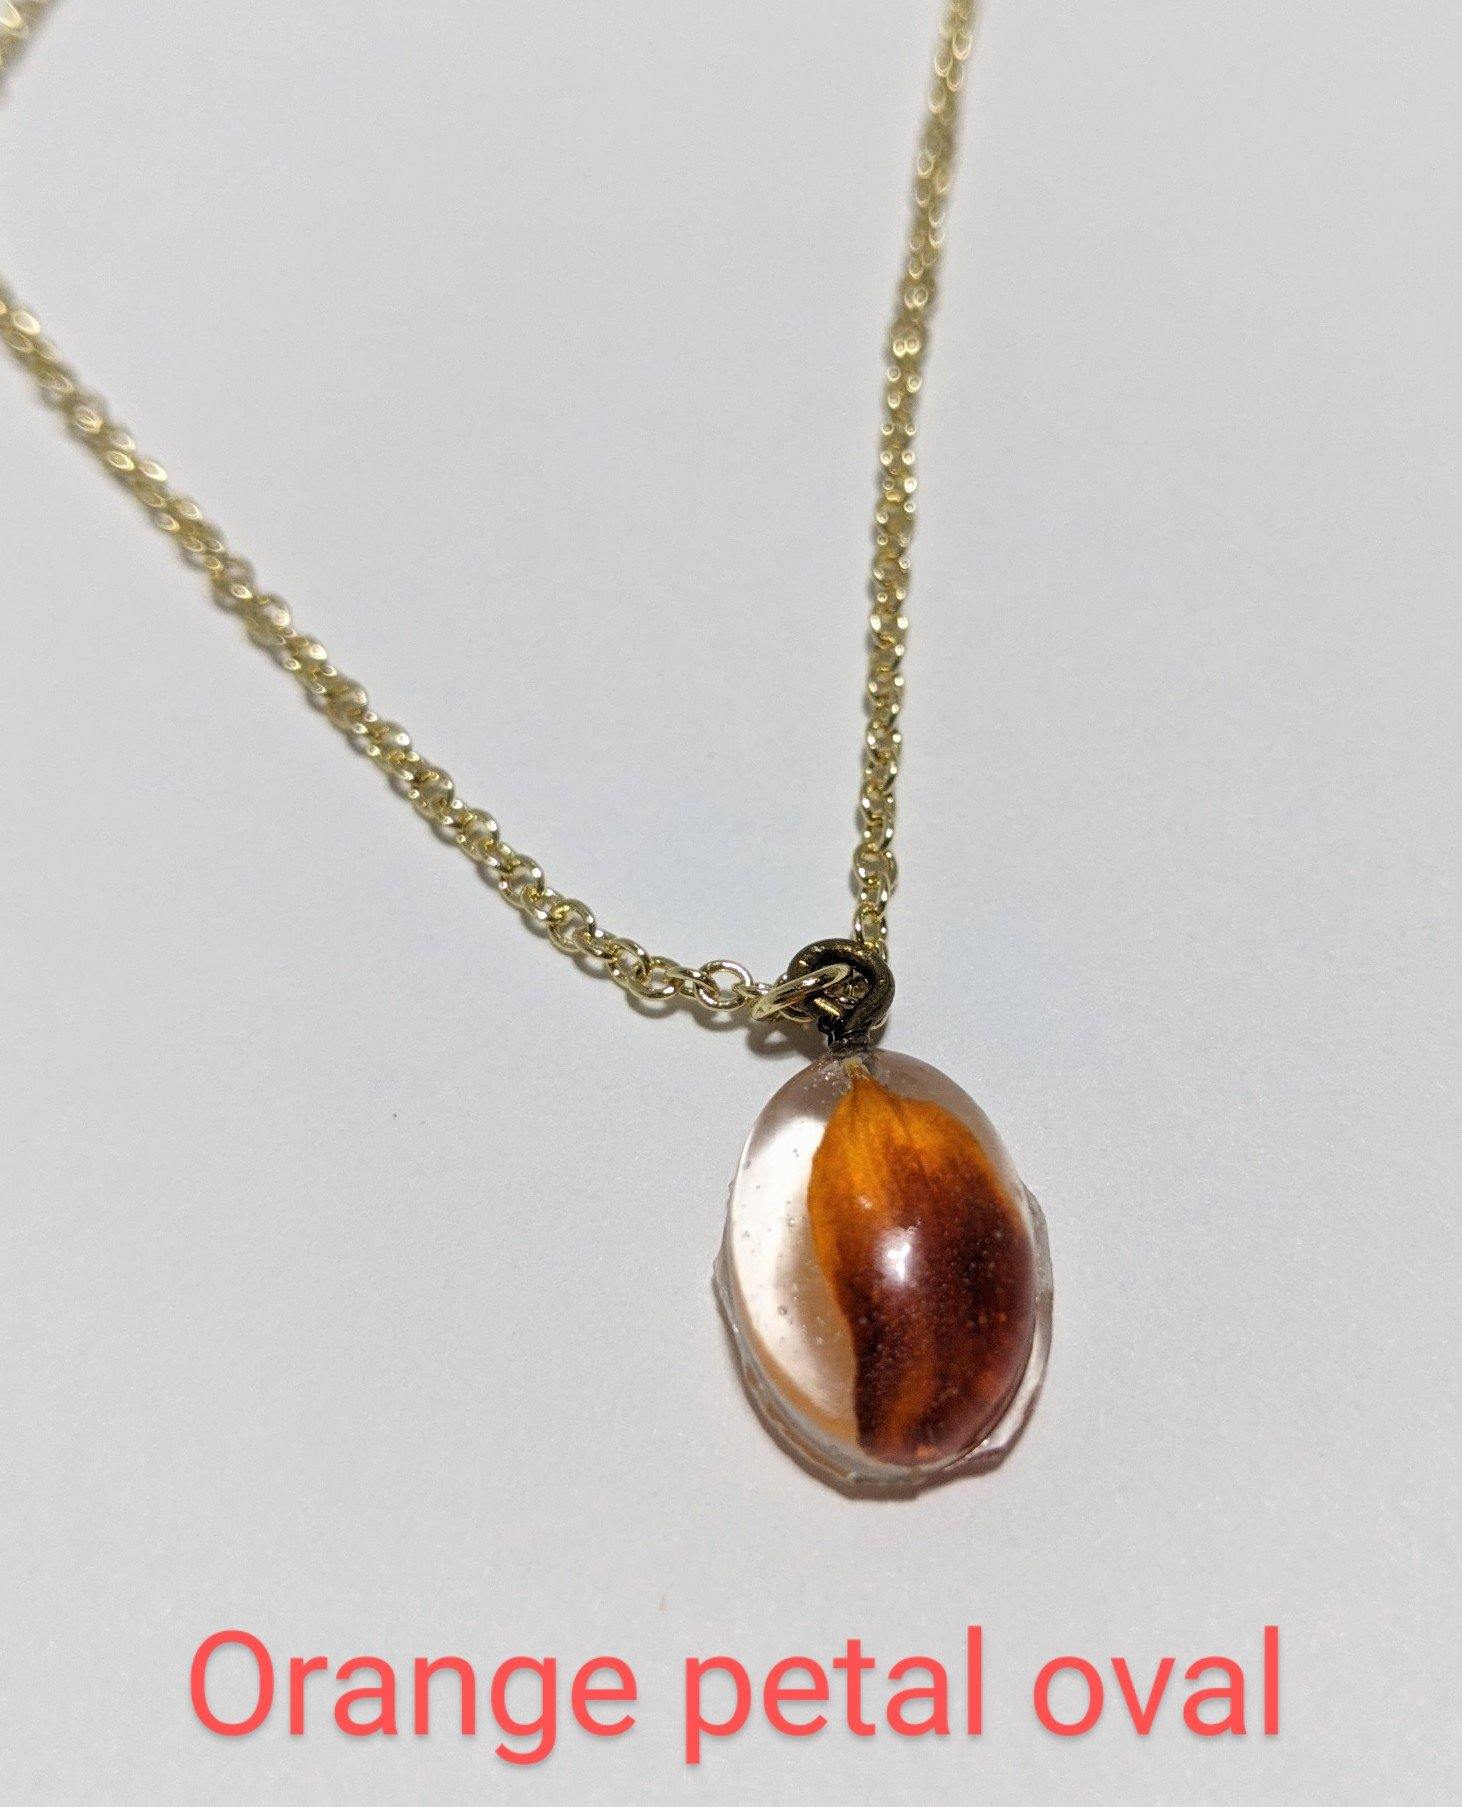 Pure Simplicity: Minimal golden or silver colored chain handmade pendant necklace - Nature's Lure